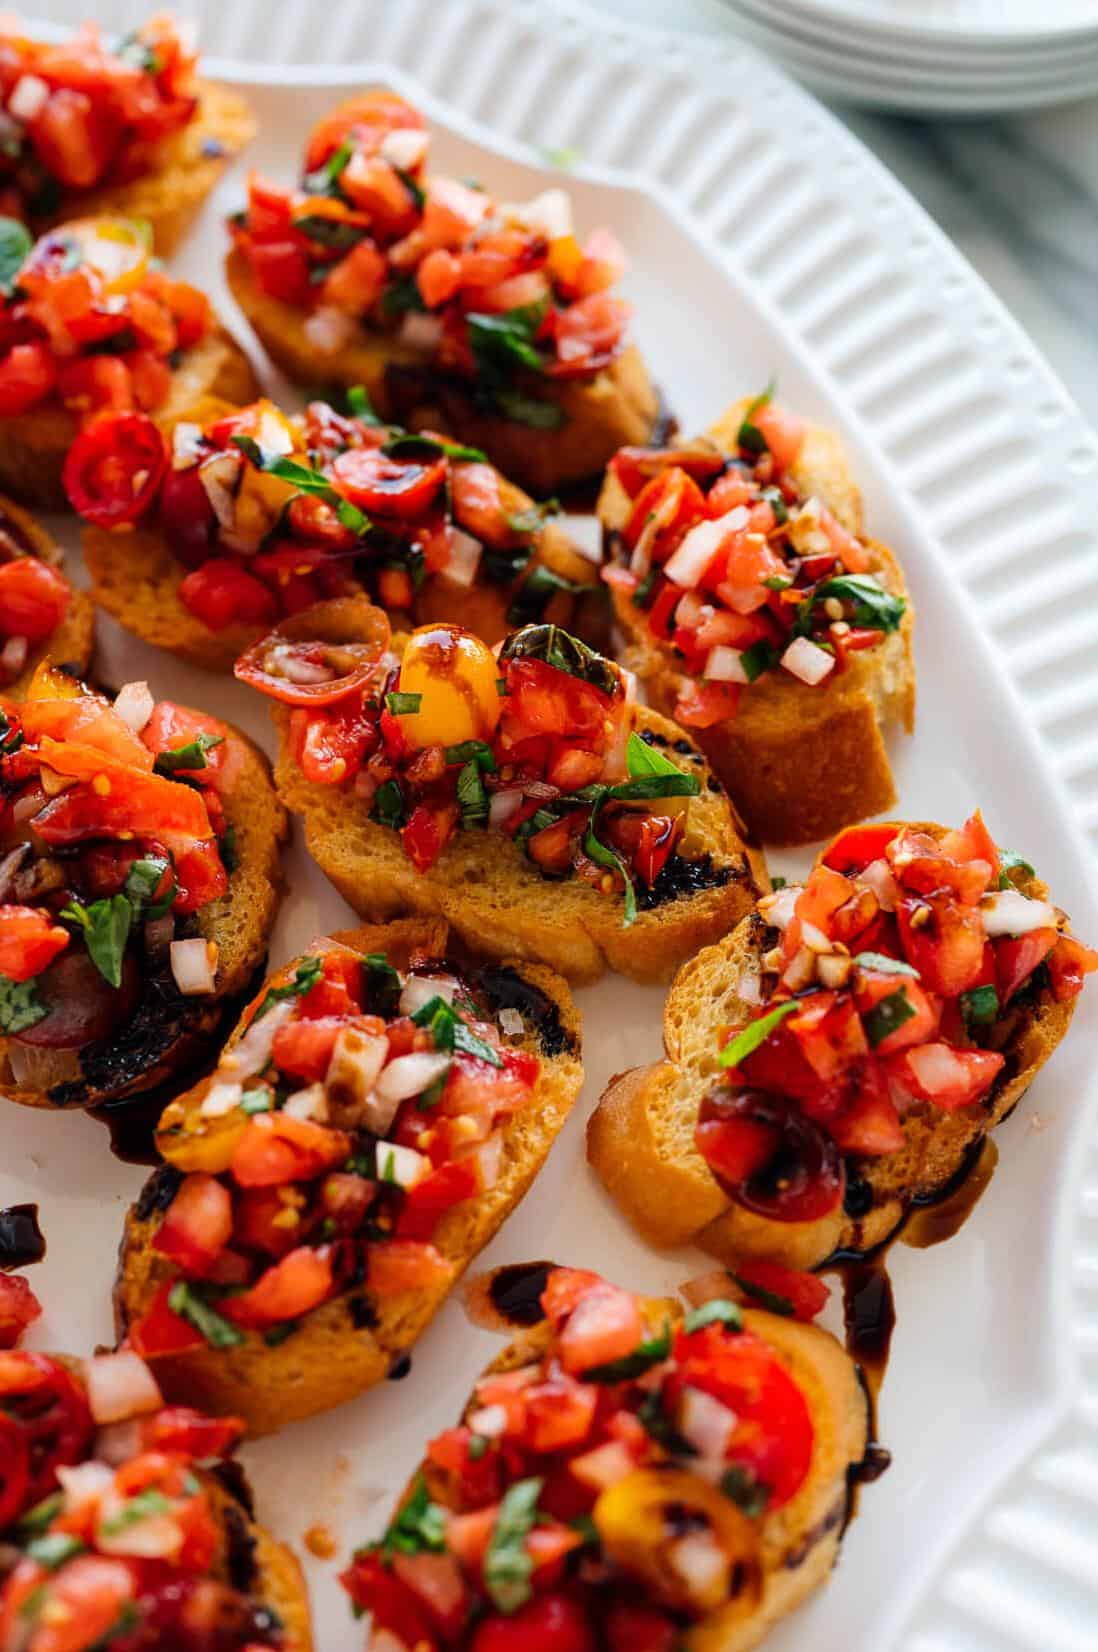  Herbaceous and tangy, this bruschetta will be a hit at your next party.